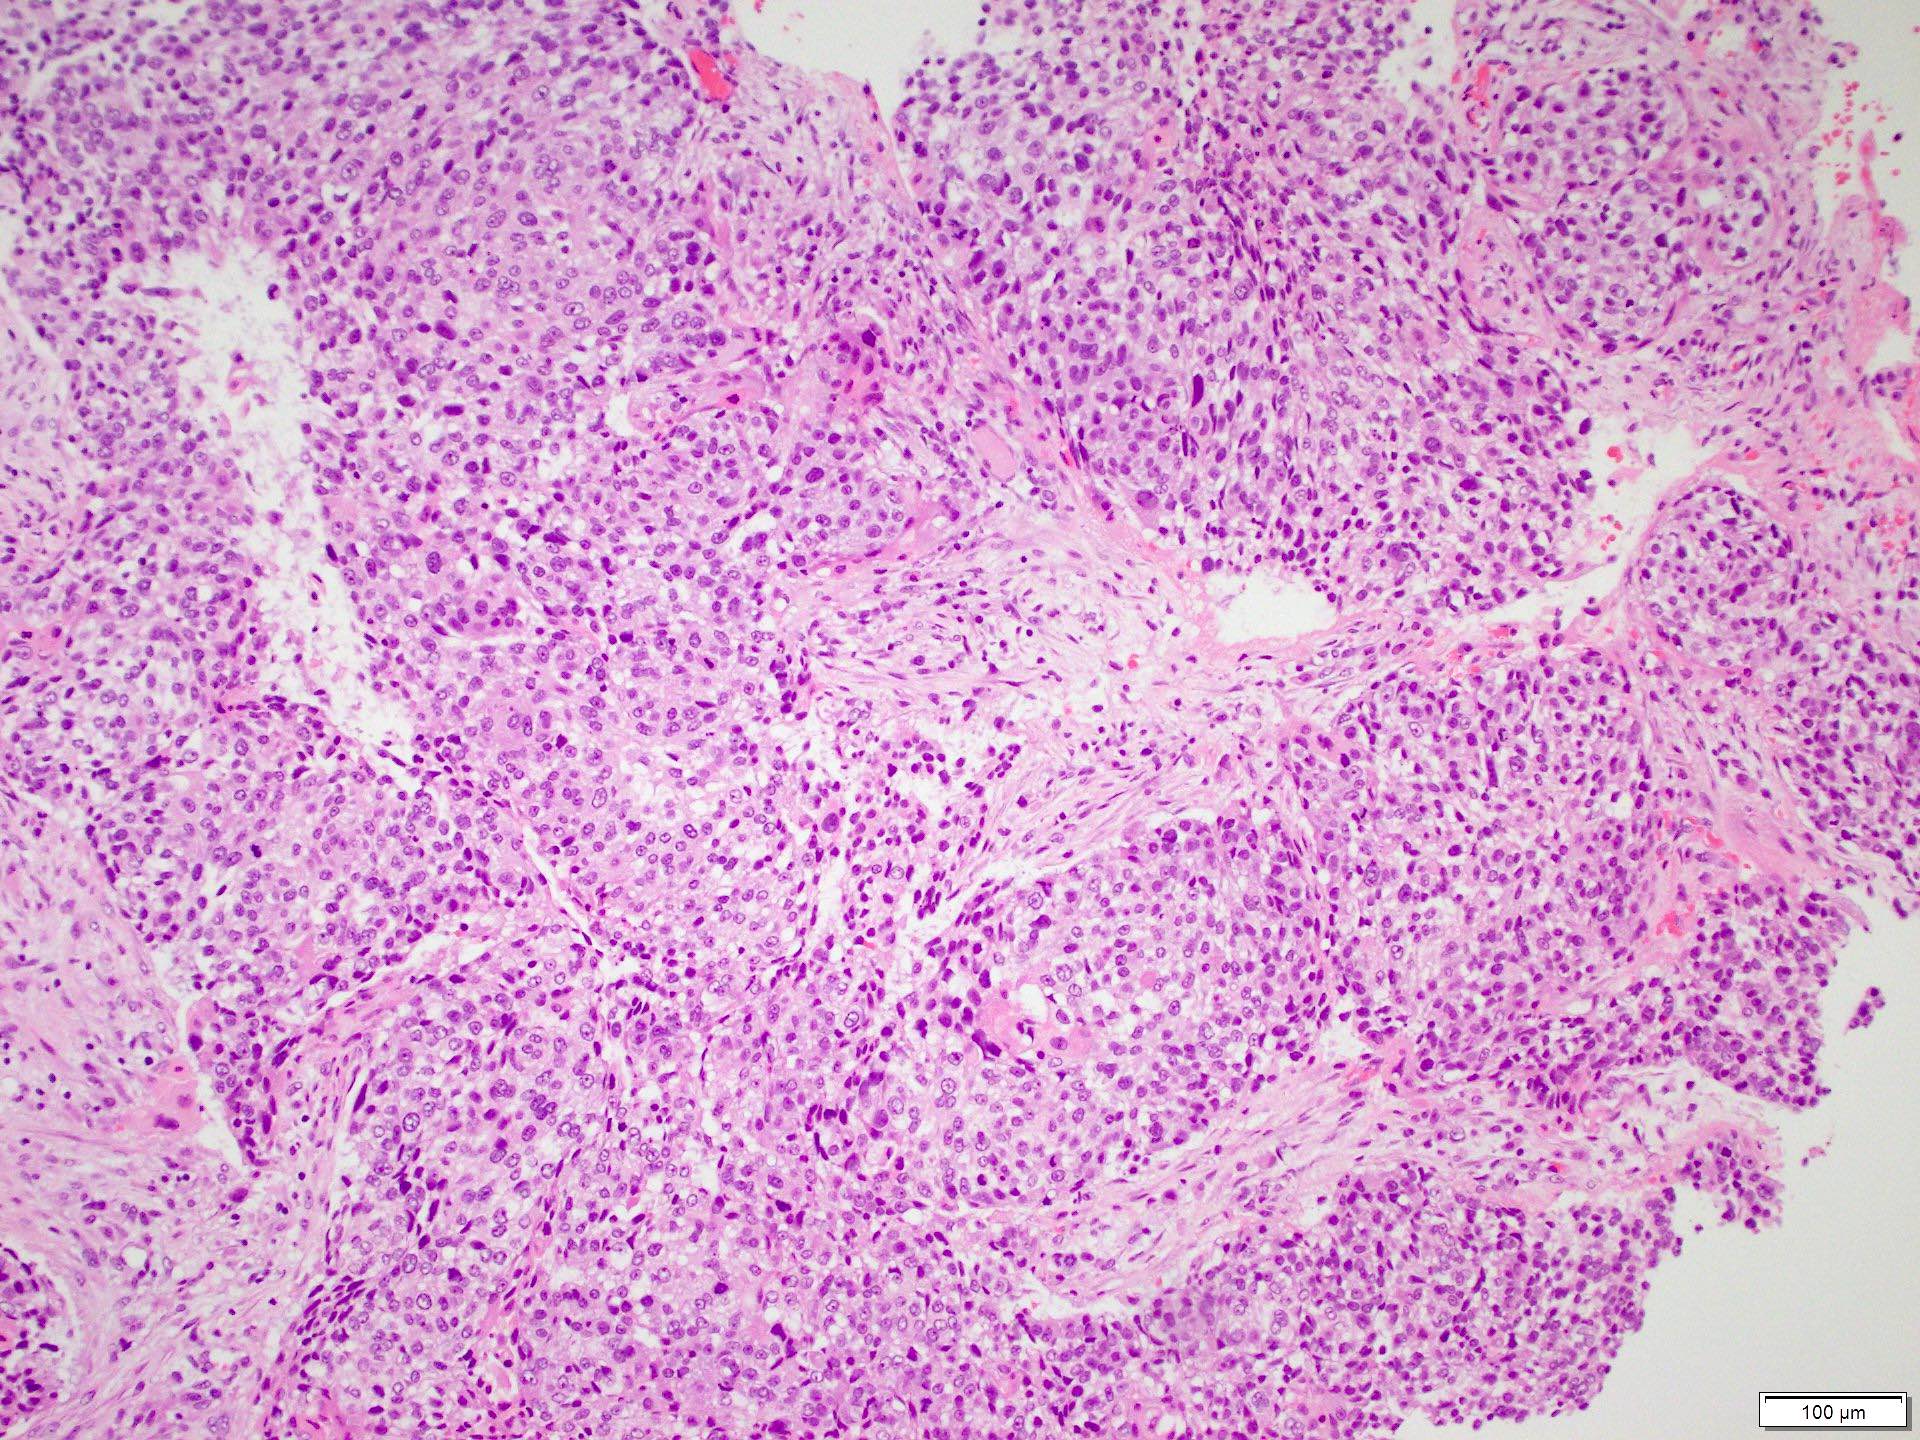 Nonkeratinizing, moderately differentiated squamous cell carcinoma